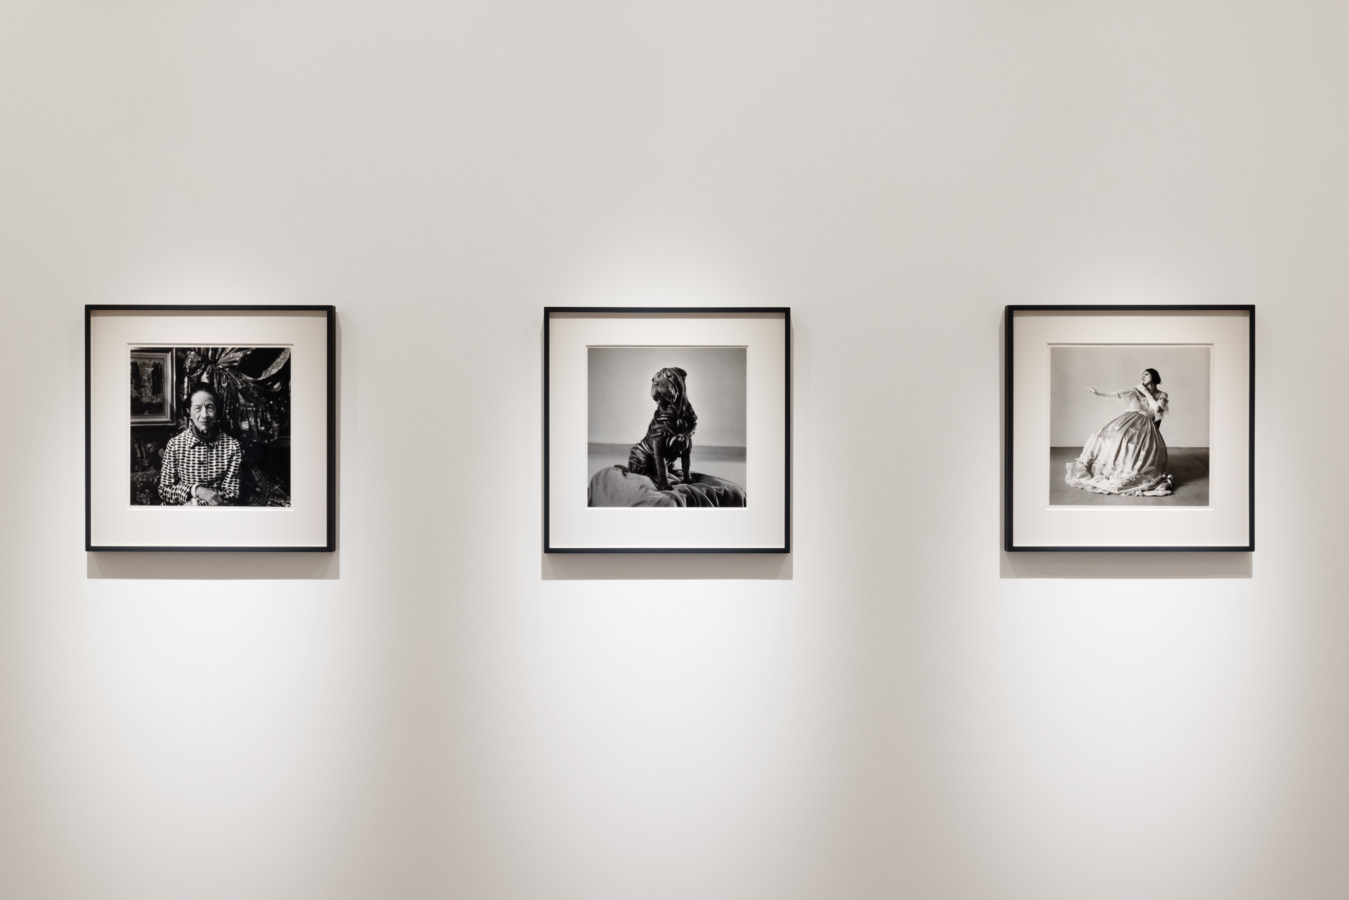 Color image of black and white photographs framed in black on white walls